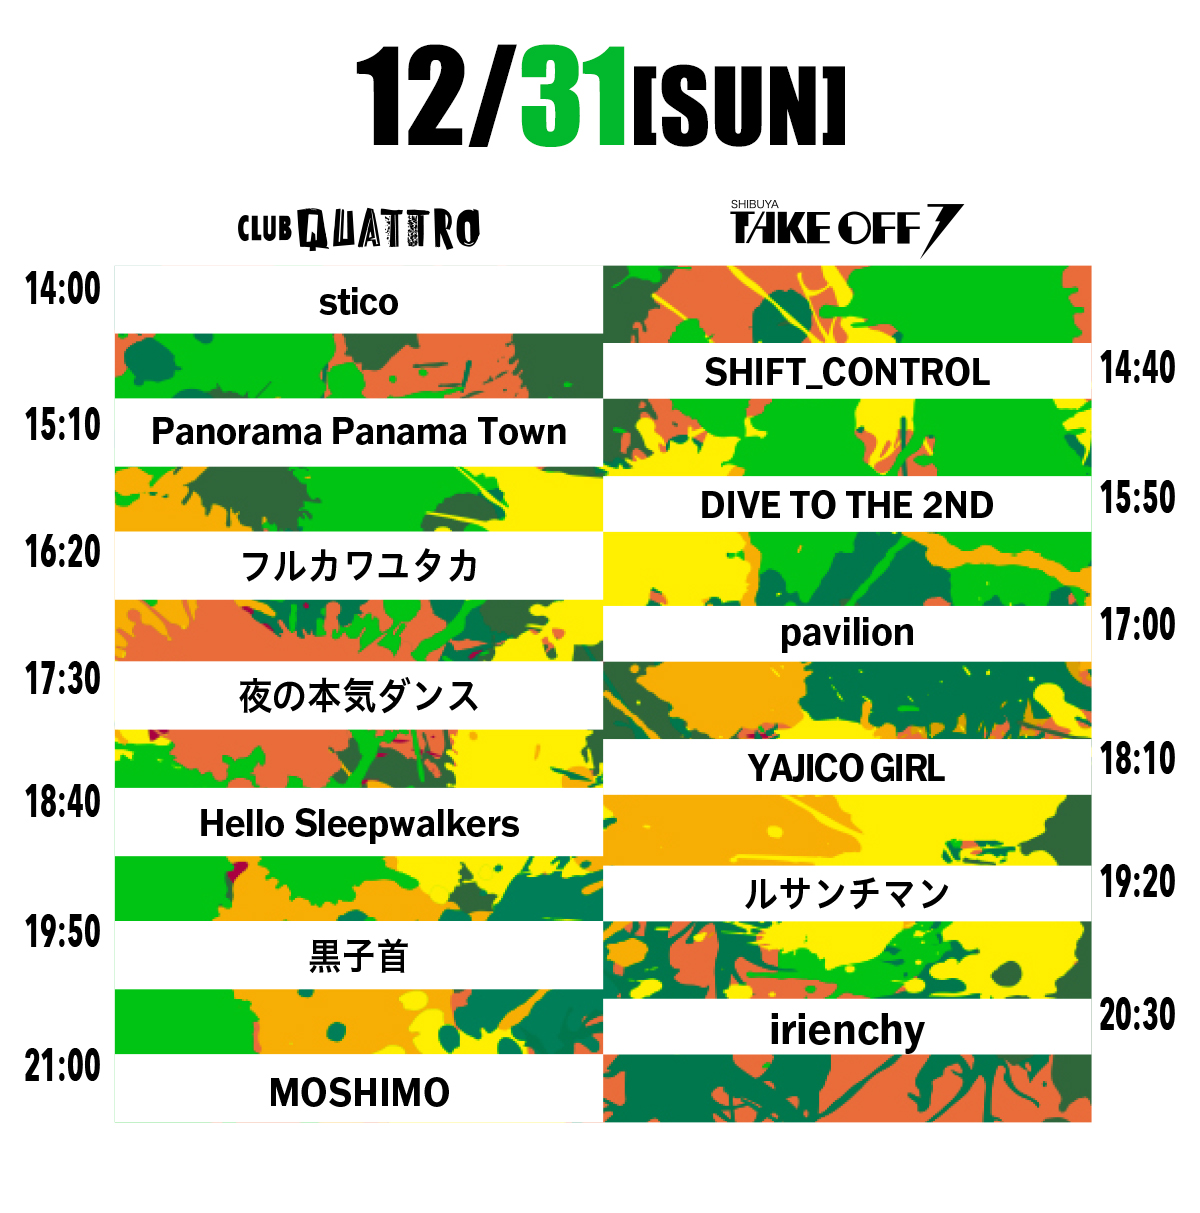 TIME TABLE 12/31